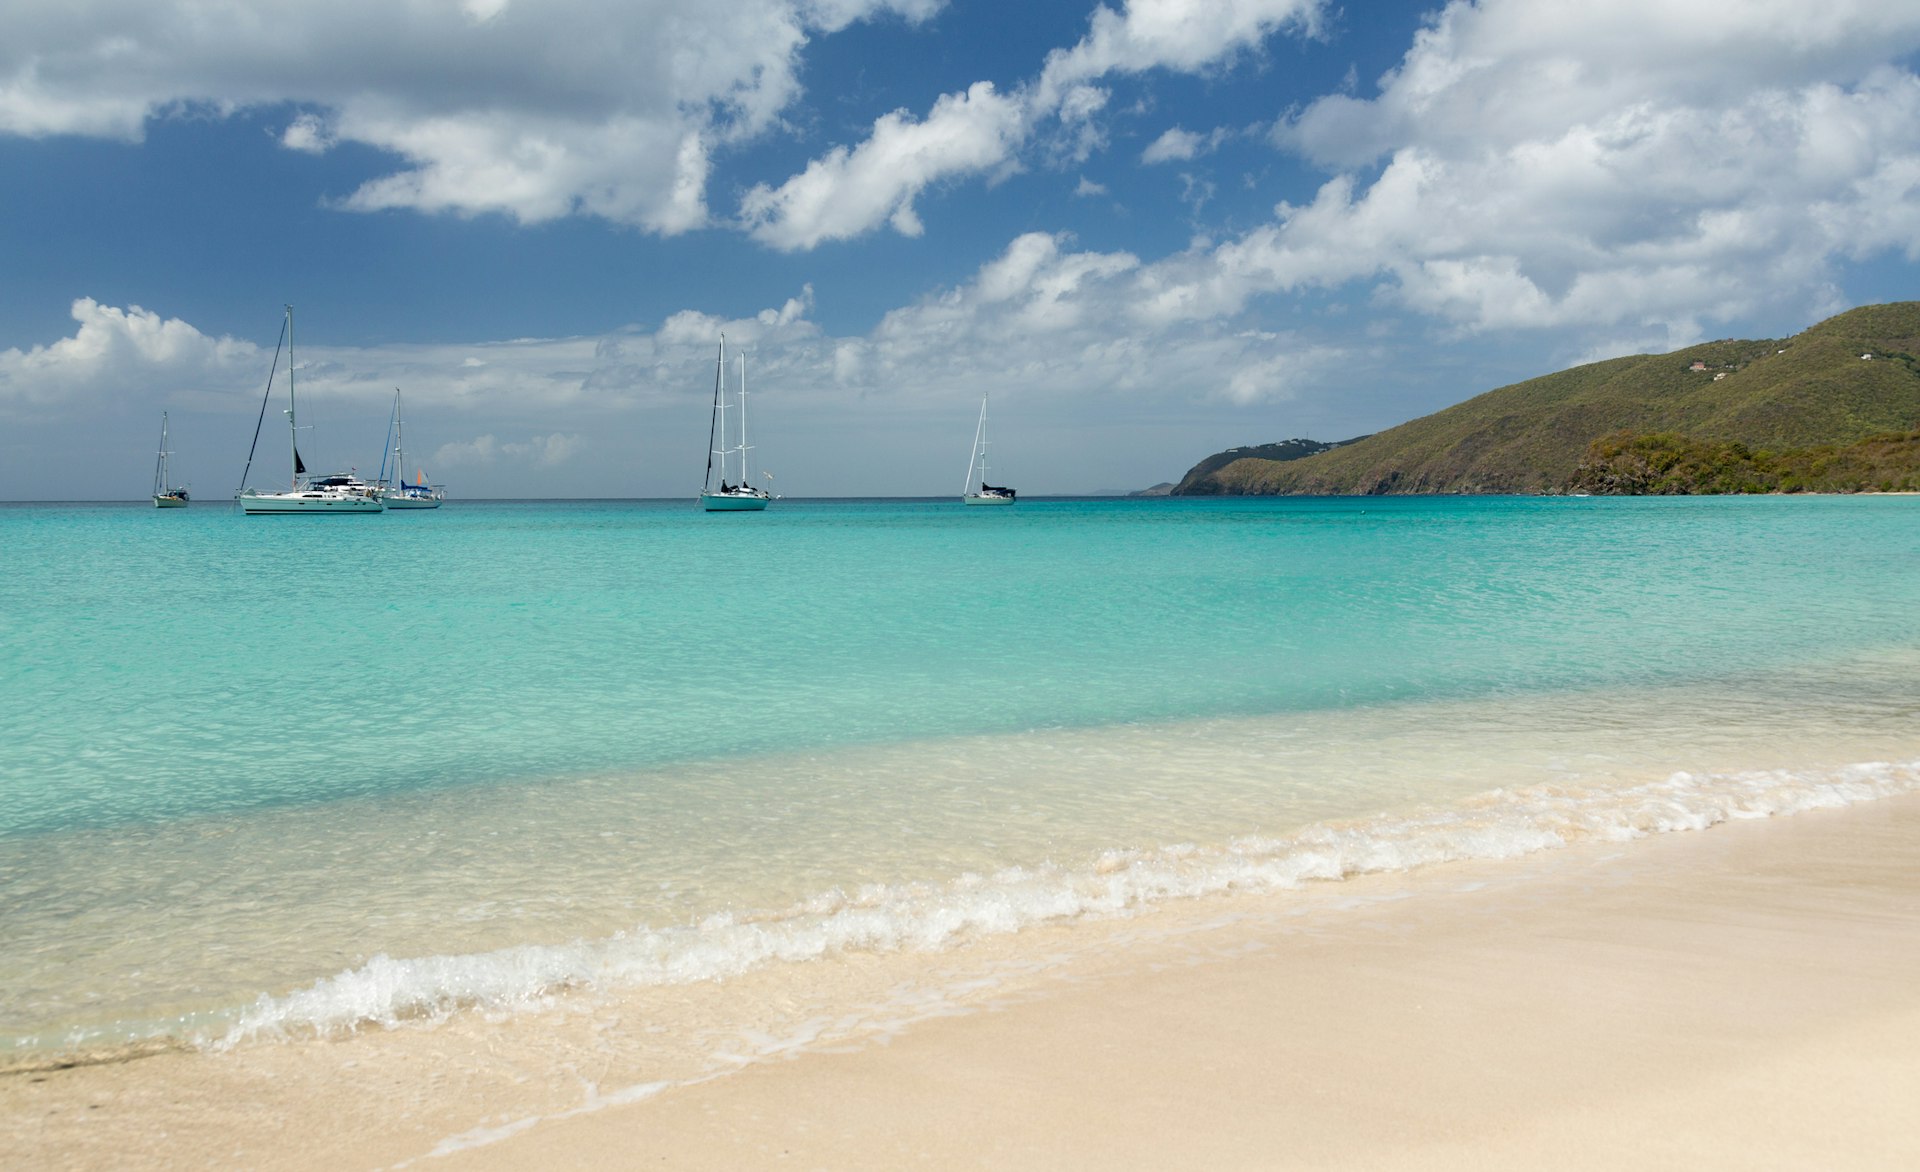 The blue waters of Brewers Bay in St Thomas